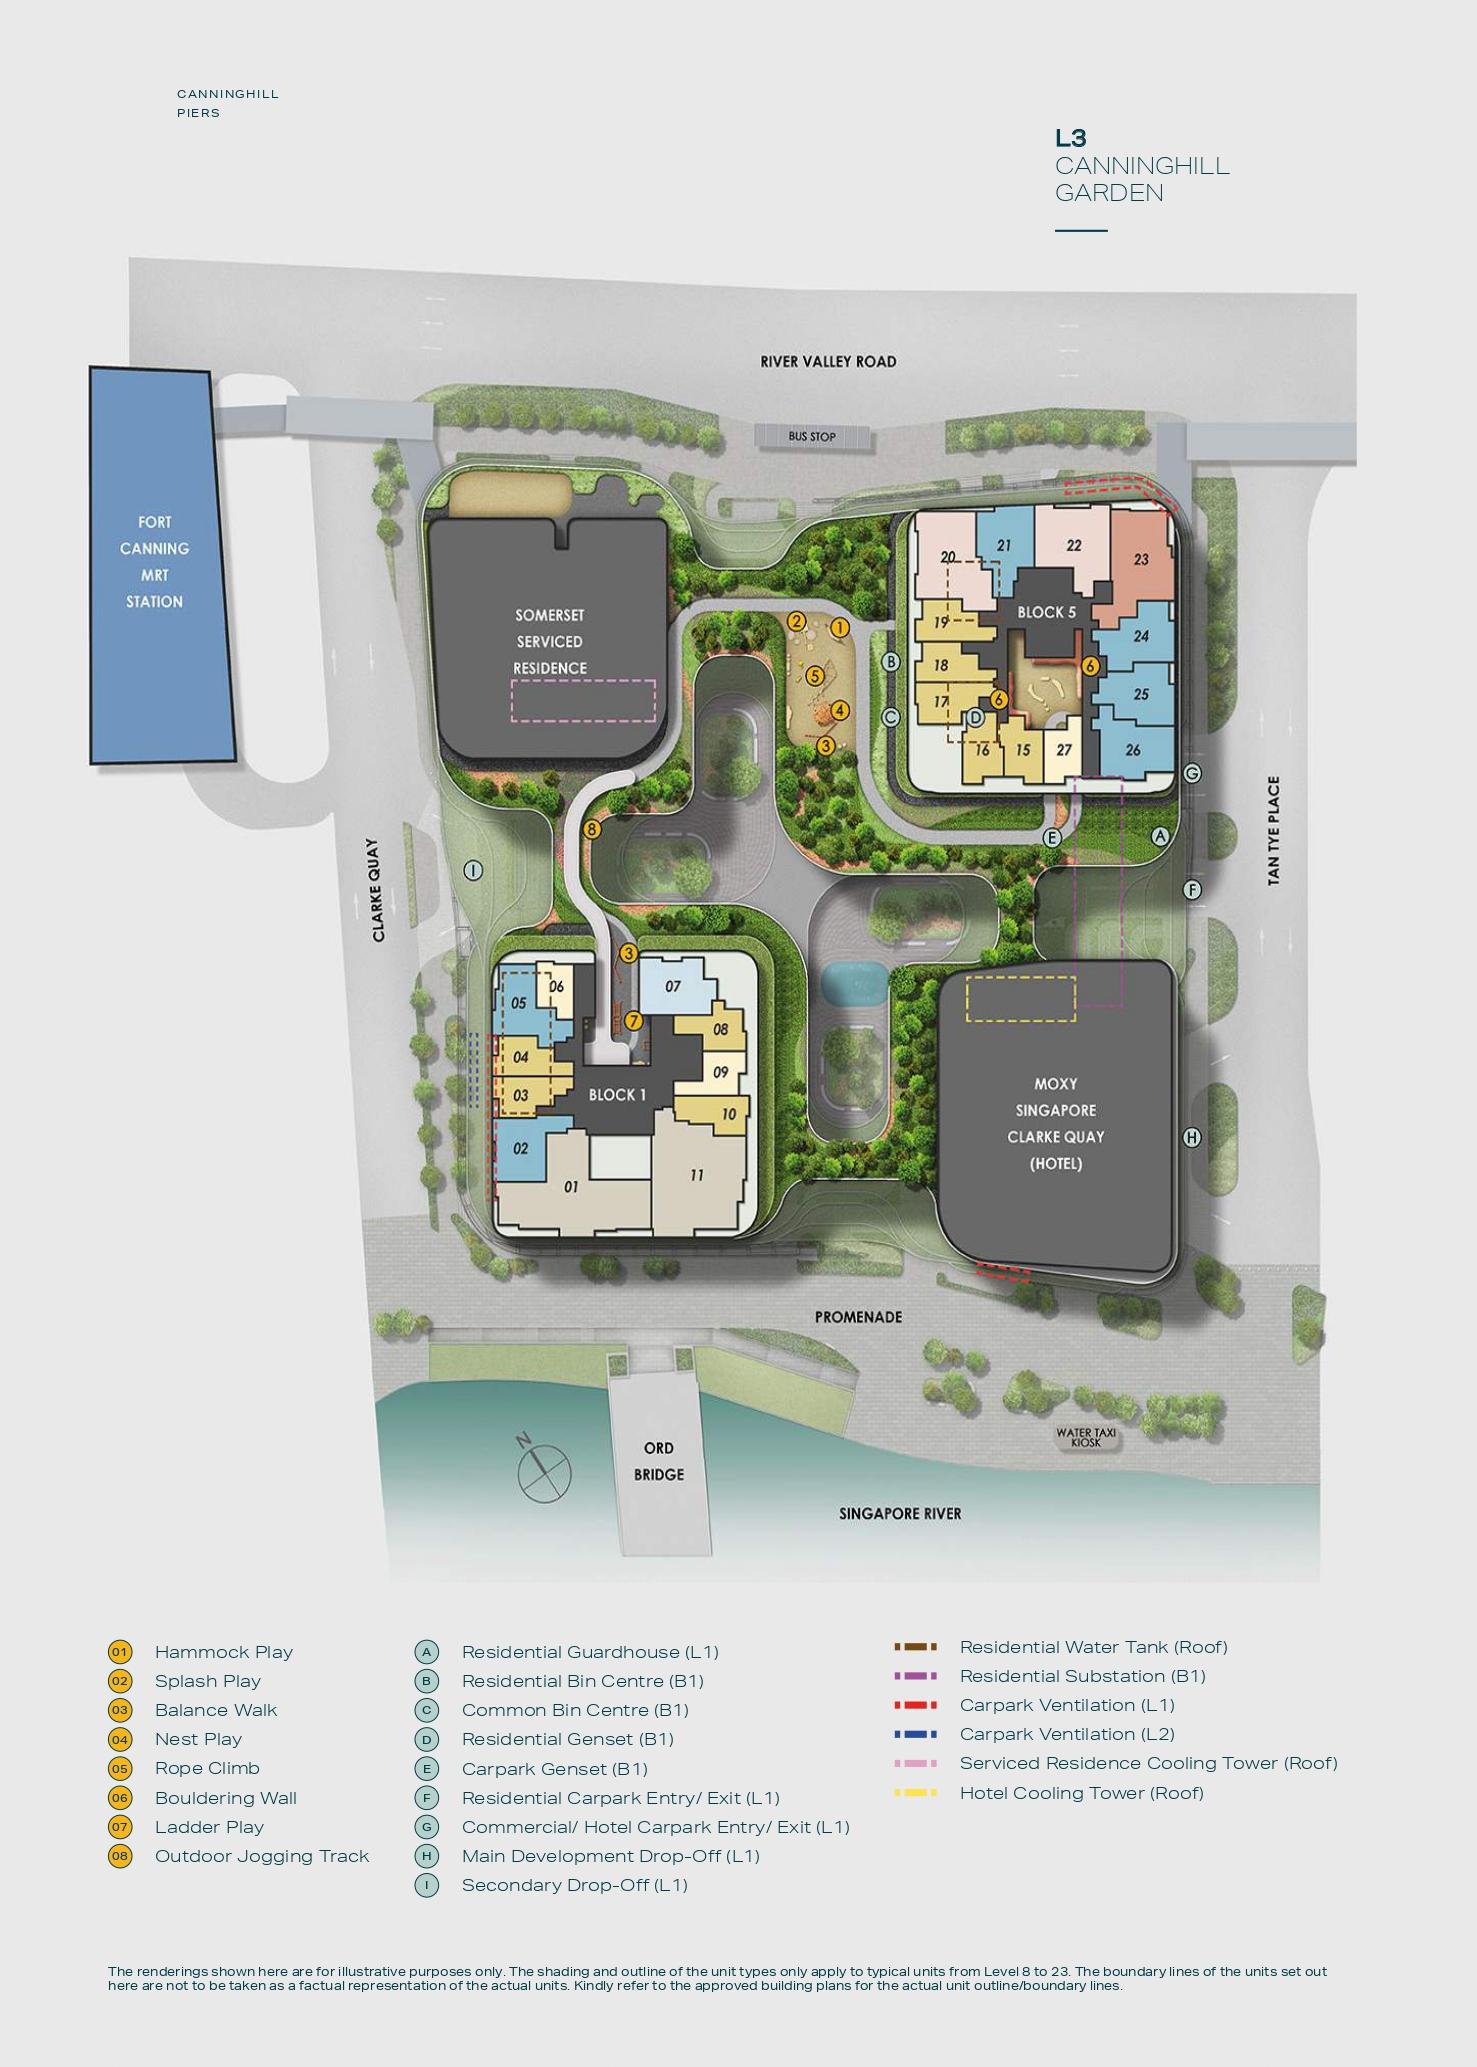 CanningHill Piers Site Plan